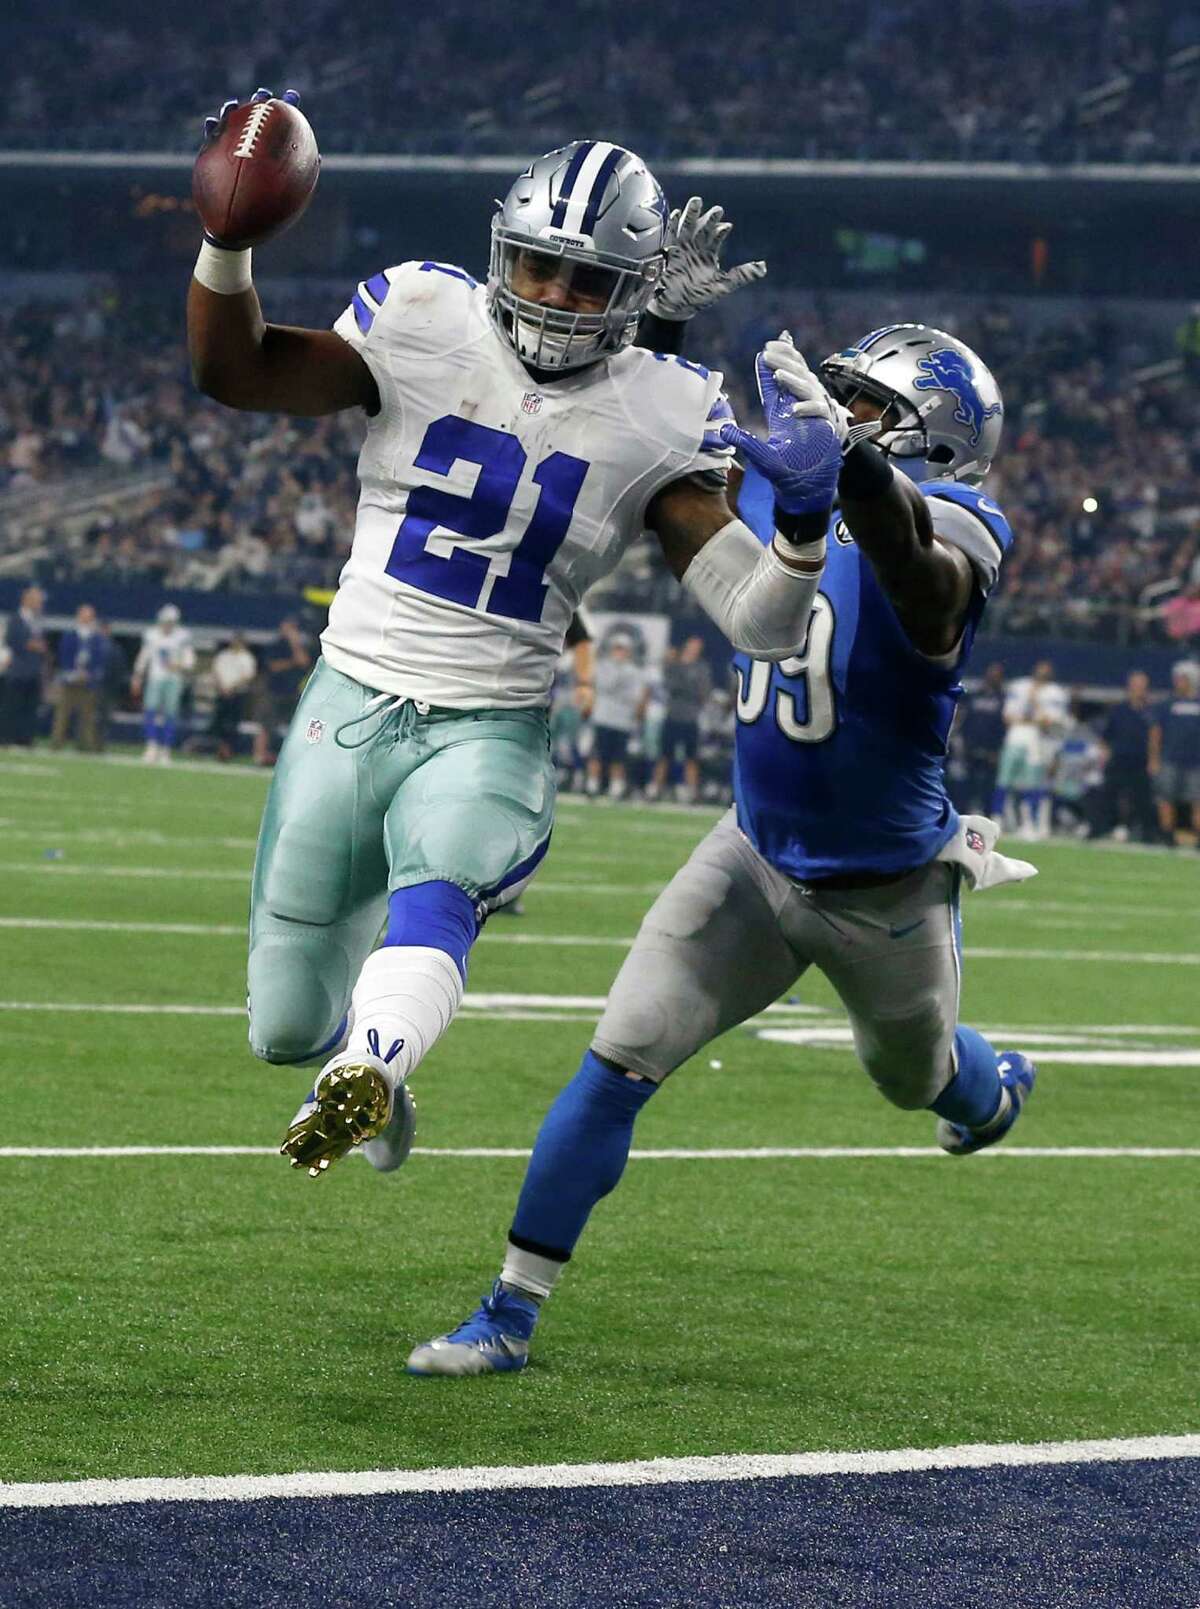 Dallas Cowboys' Ezekiel Elliott (21) leaps into the end zone after getting past Detroit Lions' Tahir Whitehead, rear, for a touchdown in the second half of an NFL football game, Monday, Dec. 26, 2016, in Arlington, Texas. (AP Photo/Michael Ainsworth)